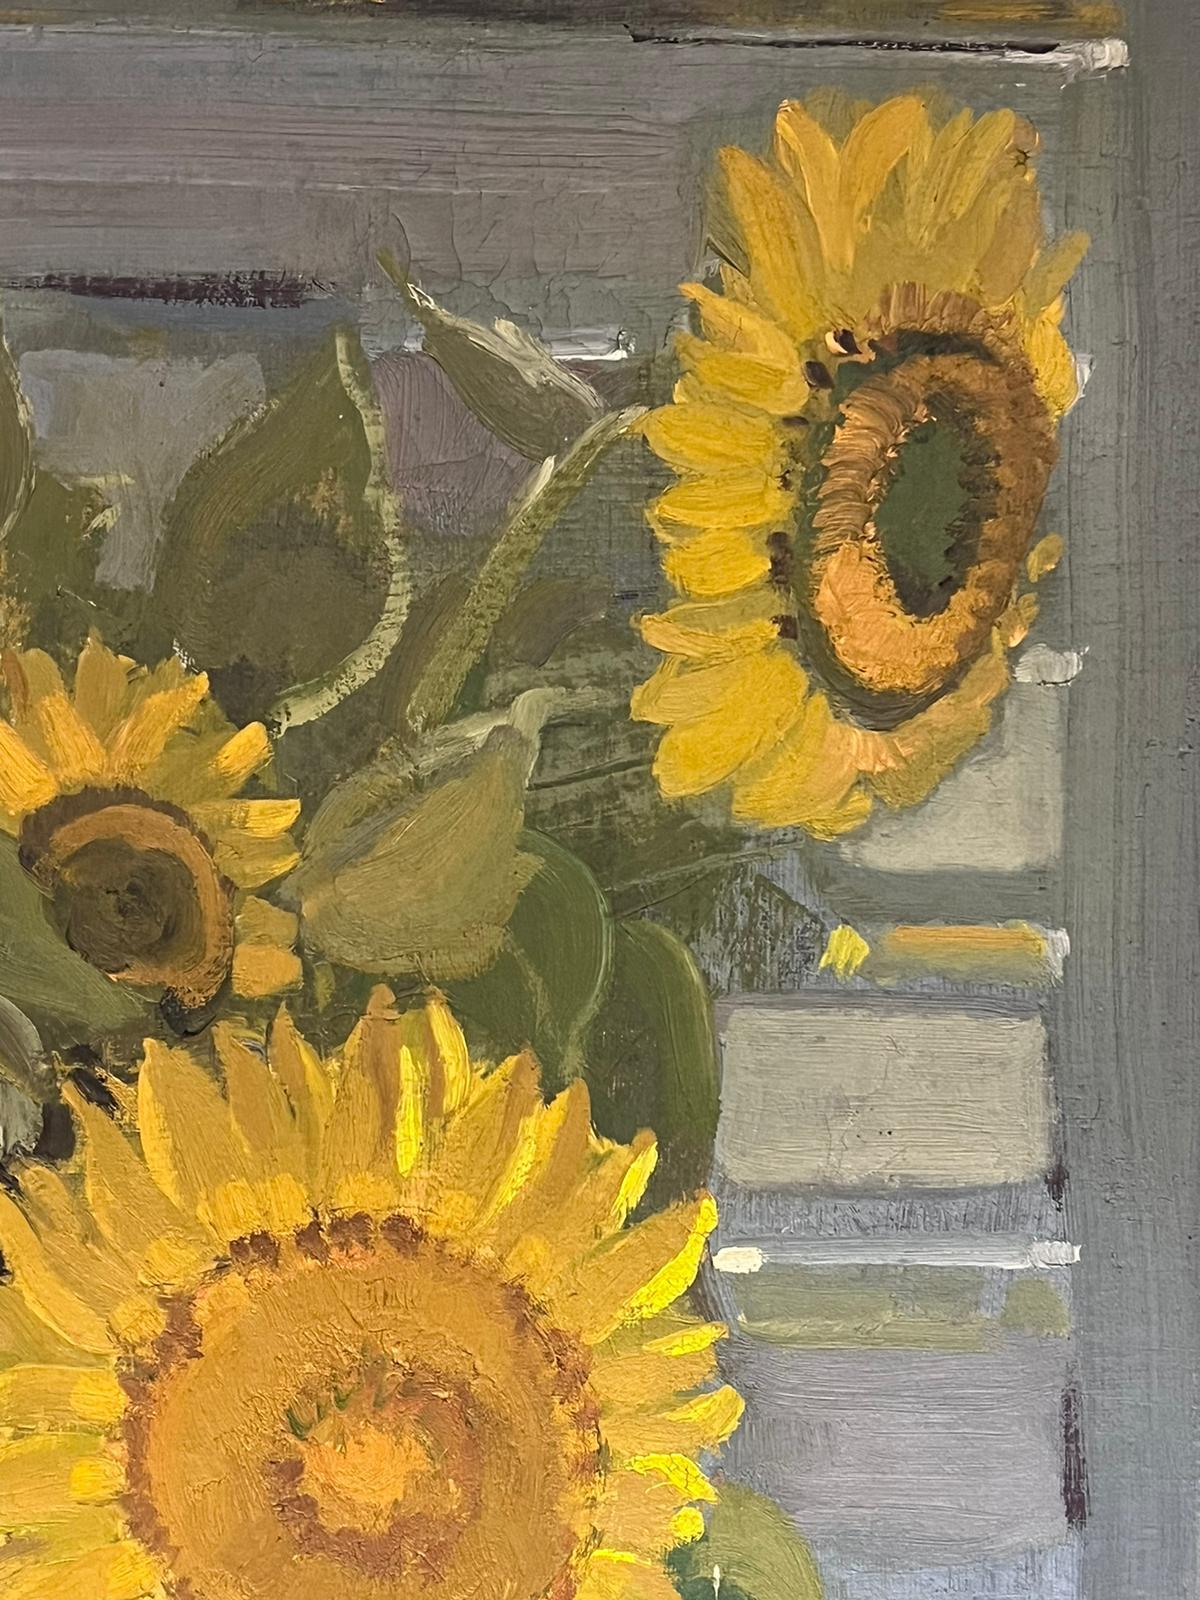 Sunflowers in the Window
by Y Blanchon, French circa 1930's period
signed oil on canvas, framed
framed: 47 x 30 inches
canvas: 45.5 x 29 inches
provenance: private collection, Normandy, France
condition: very good and sound condition